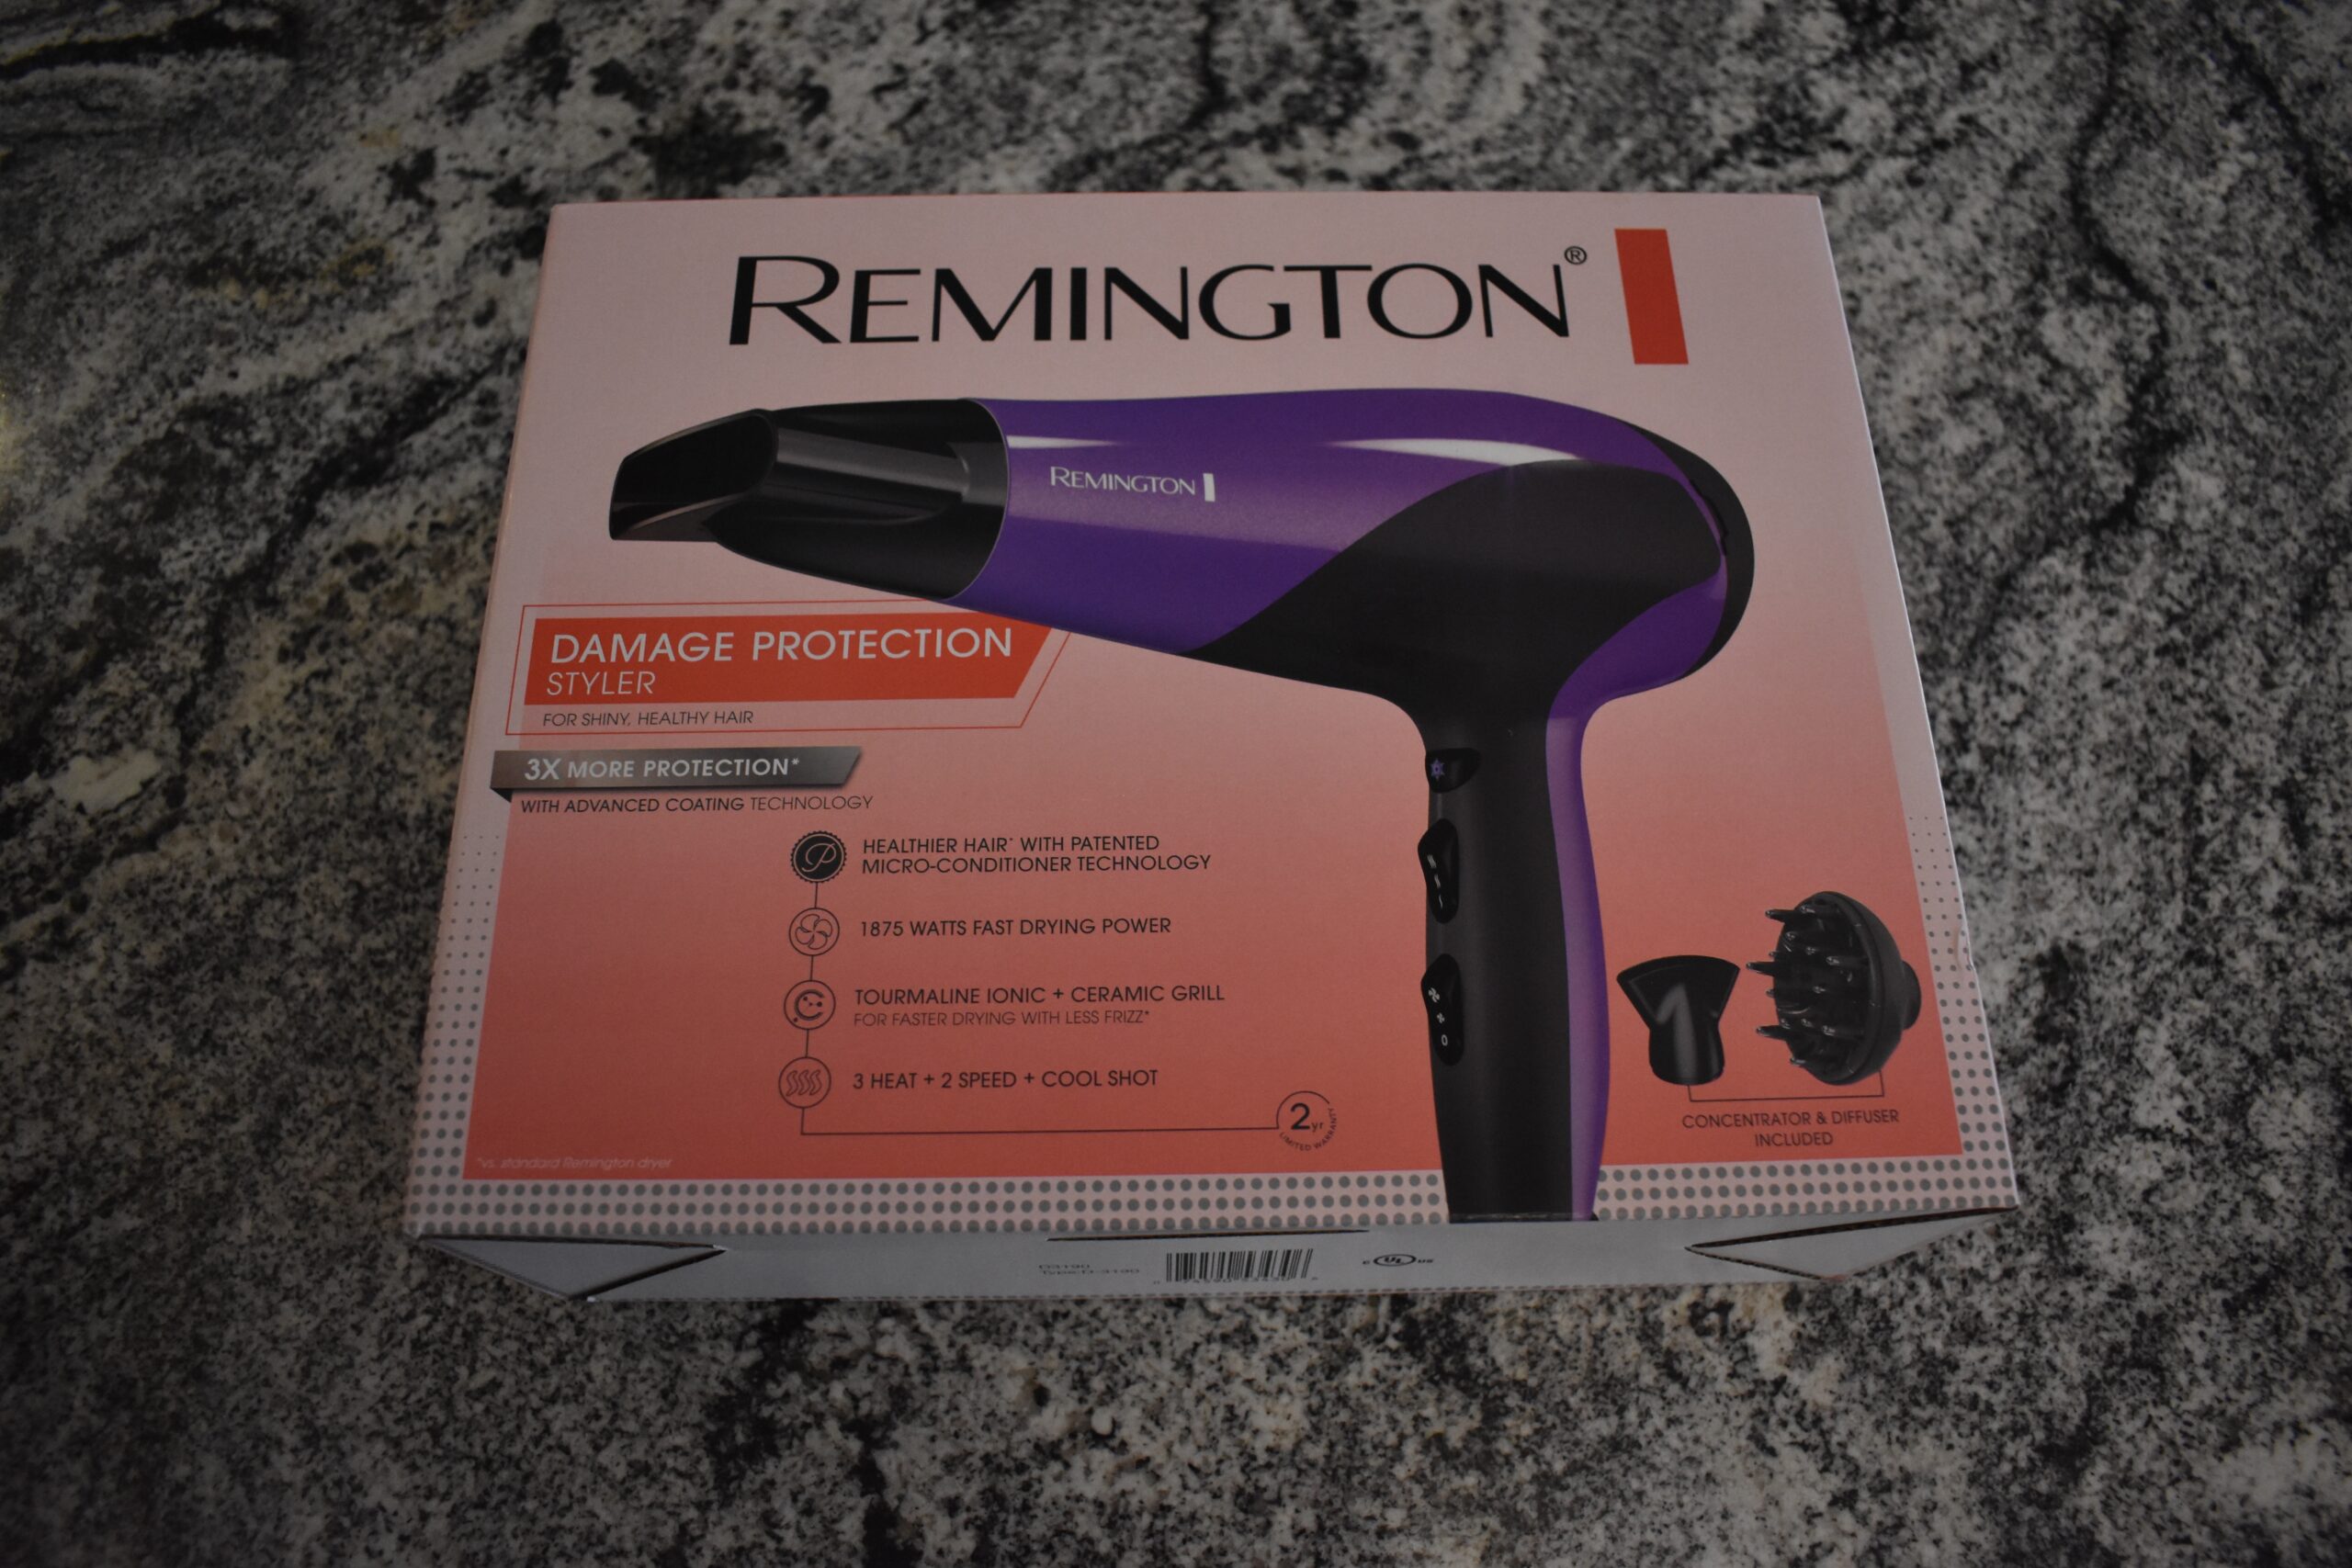 The Remington D3190 Damage Protection hair dryer in its box